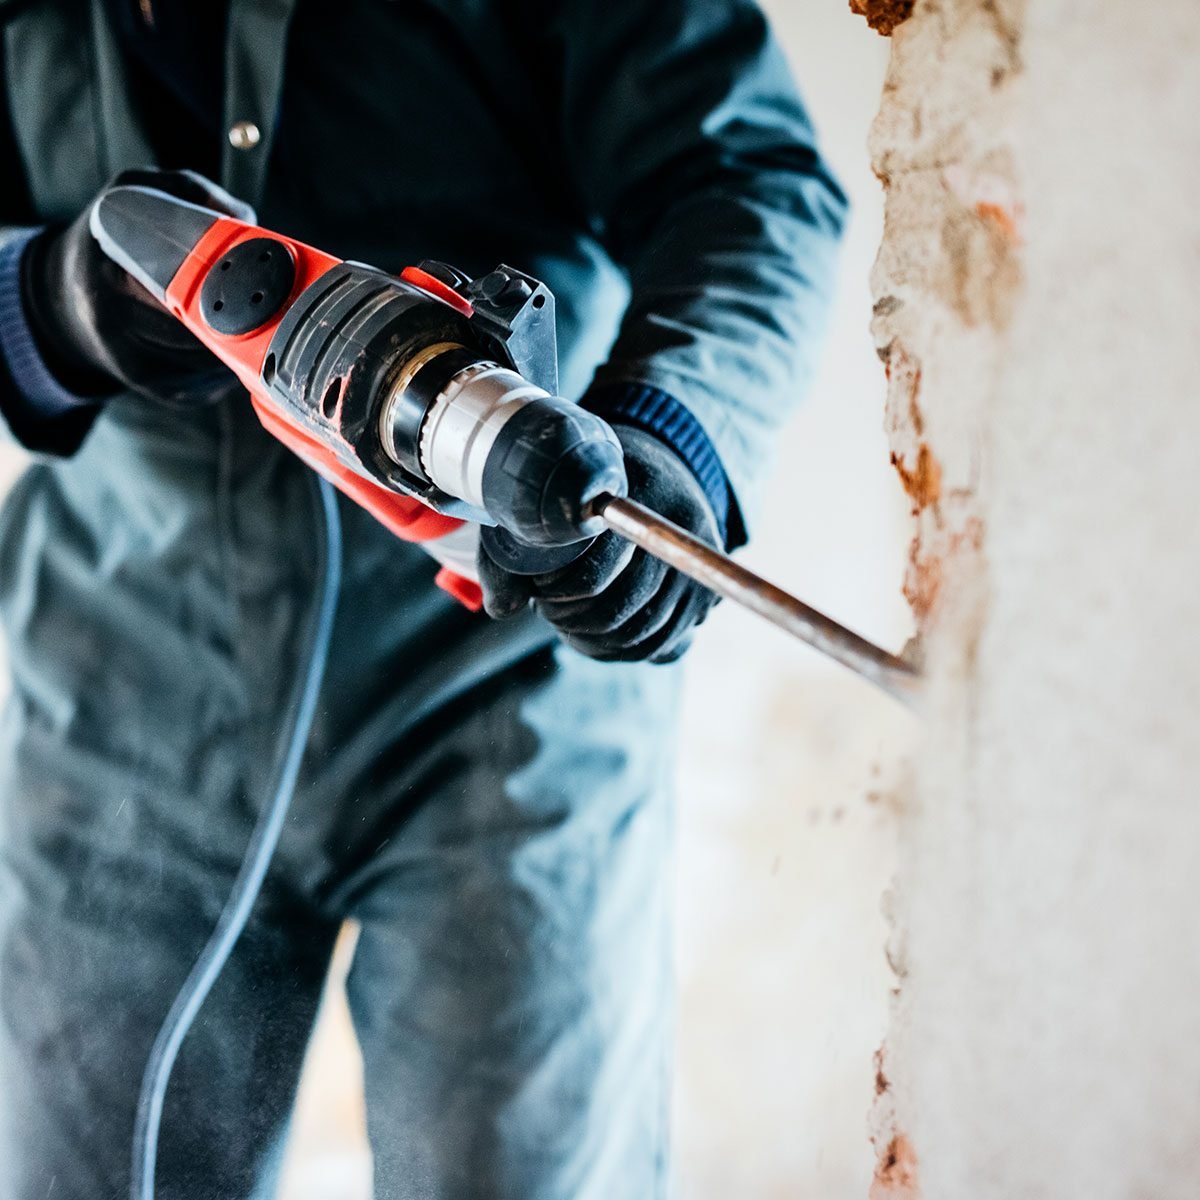 Rotary Drill vs. Hammer Drill: What's the Difference?